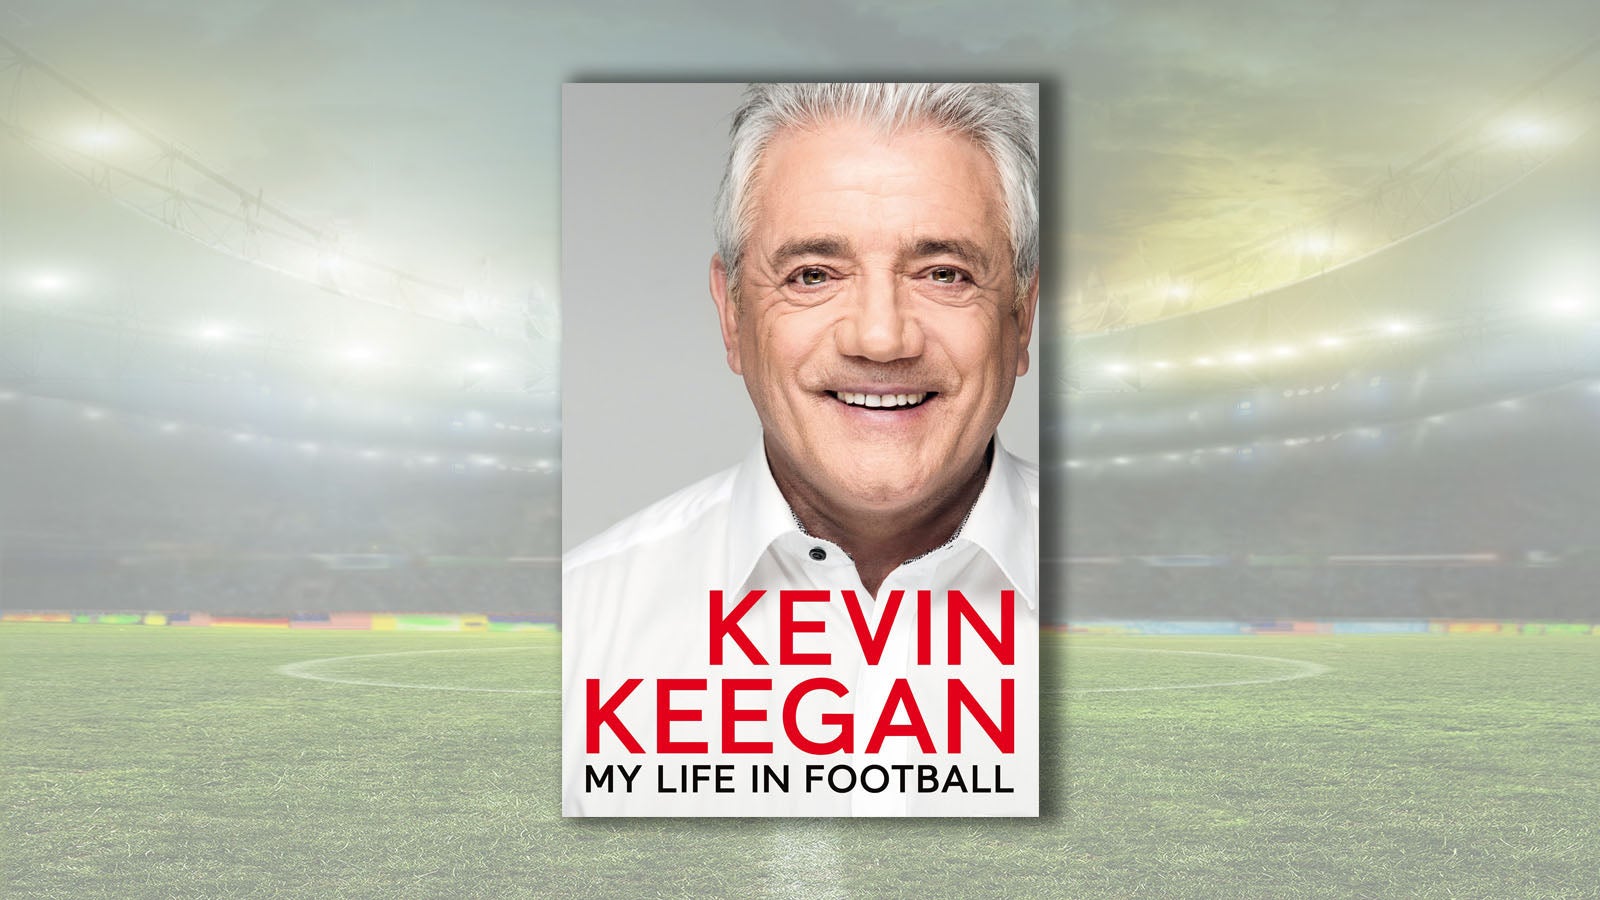 My Life in Football book cover against a background of a foodfall stadium